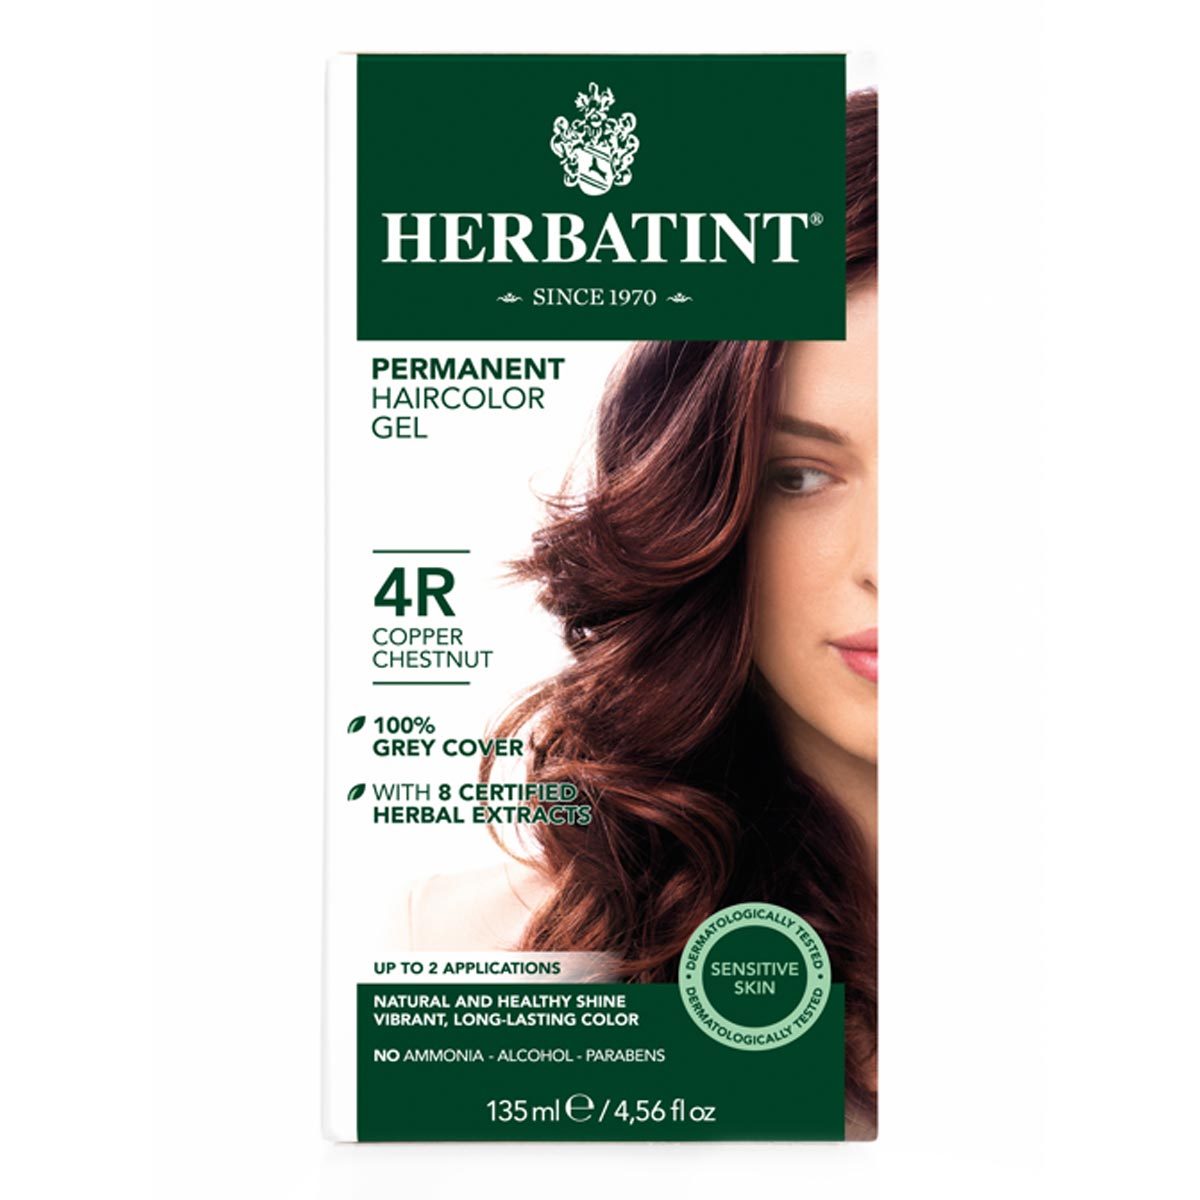 Primary image of 4R Copper Chestnut Permanent Hair Color Gel